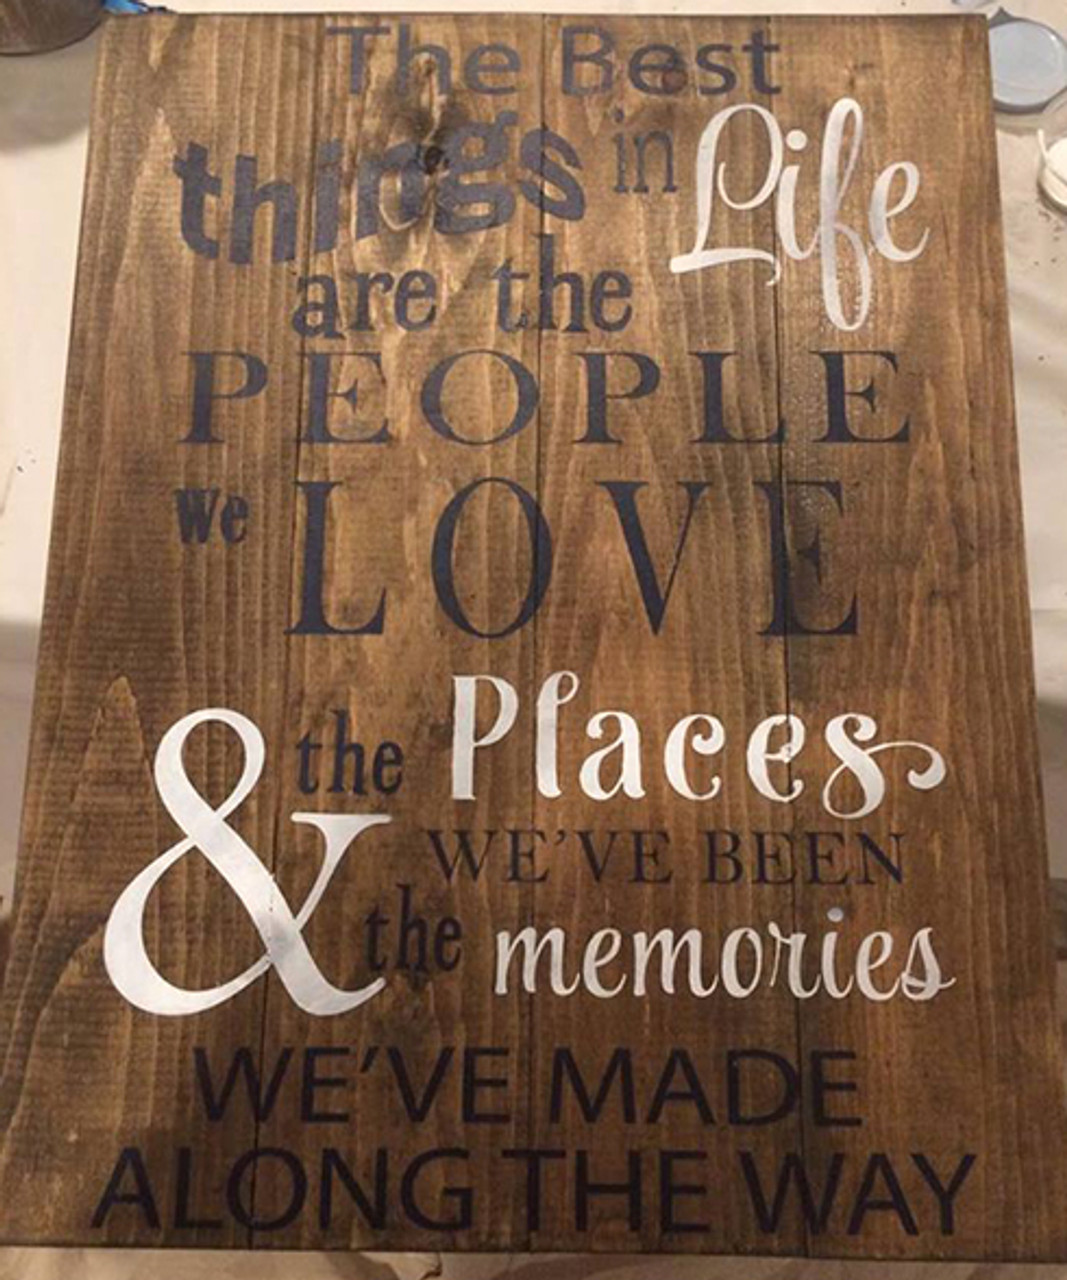 The Best Things In Life Are The People We Love, The Places We've Been ...